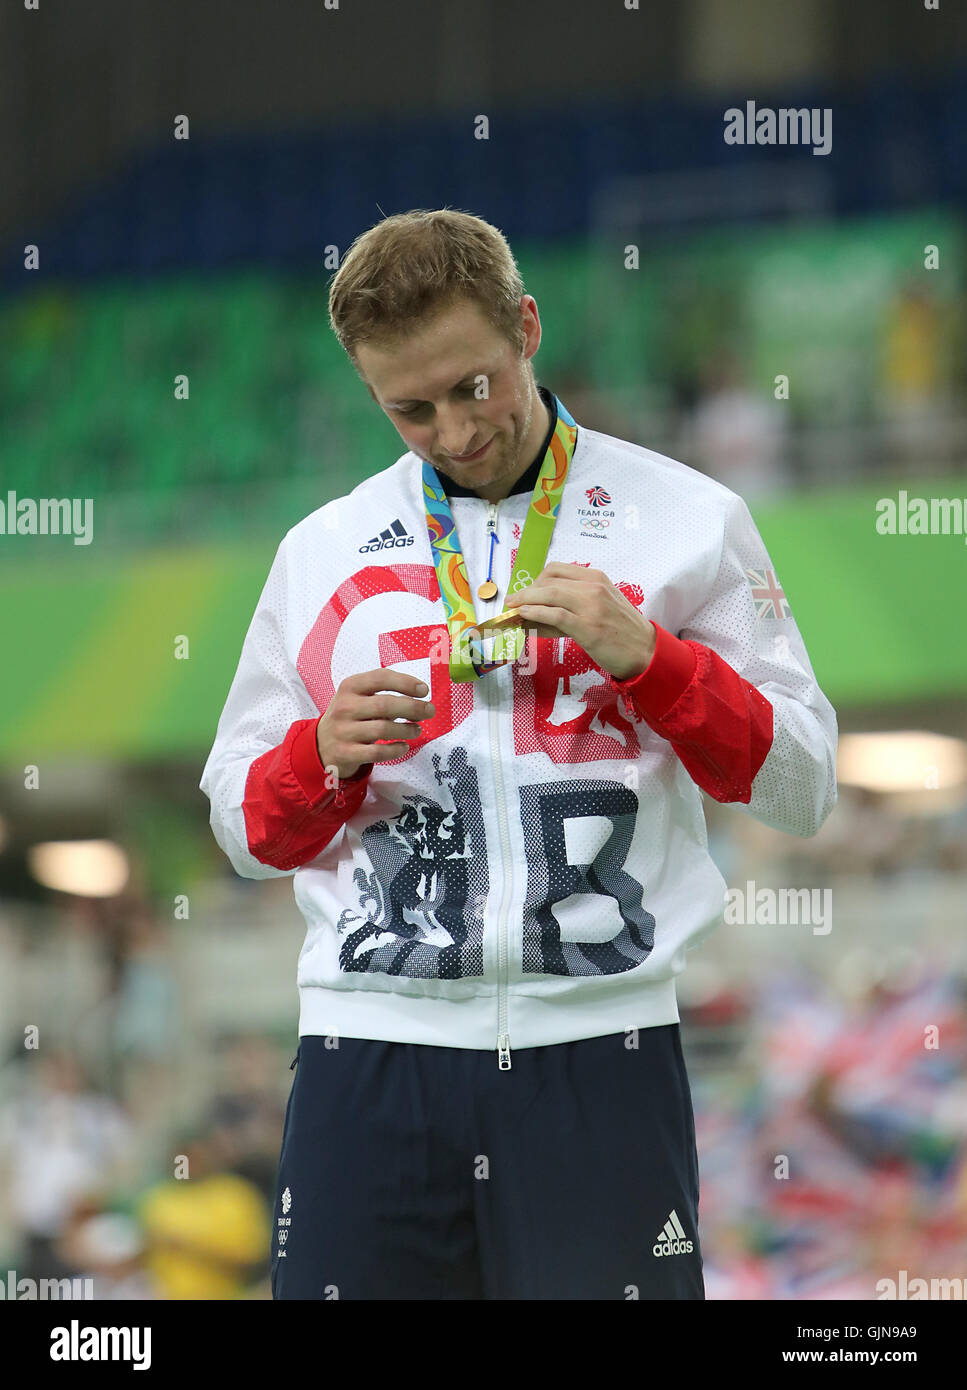 Great Britain's Jason Kenny on the podium after winning the gold medal in the Men's Keirin Final at the Rio Olympic Velodrome on the eleventh day of the Rio Olympics Games, Brazil. Picture date: Tuesday August 16, 2016. Photo credit should read: David Davies/PA Wire. Stock Photo